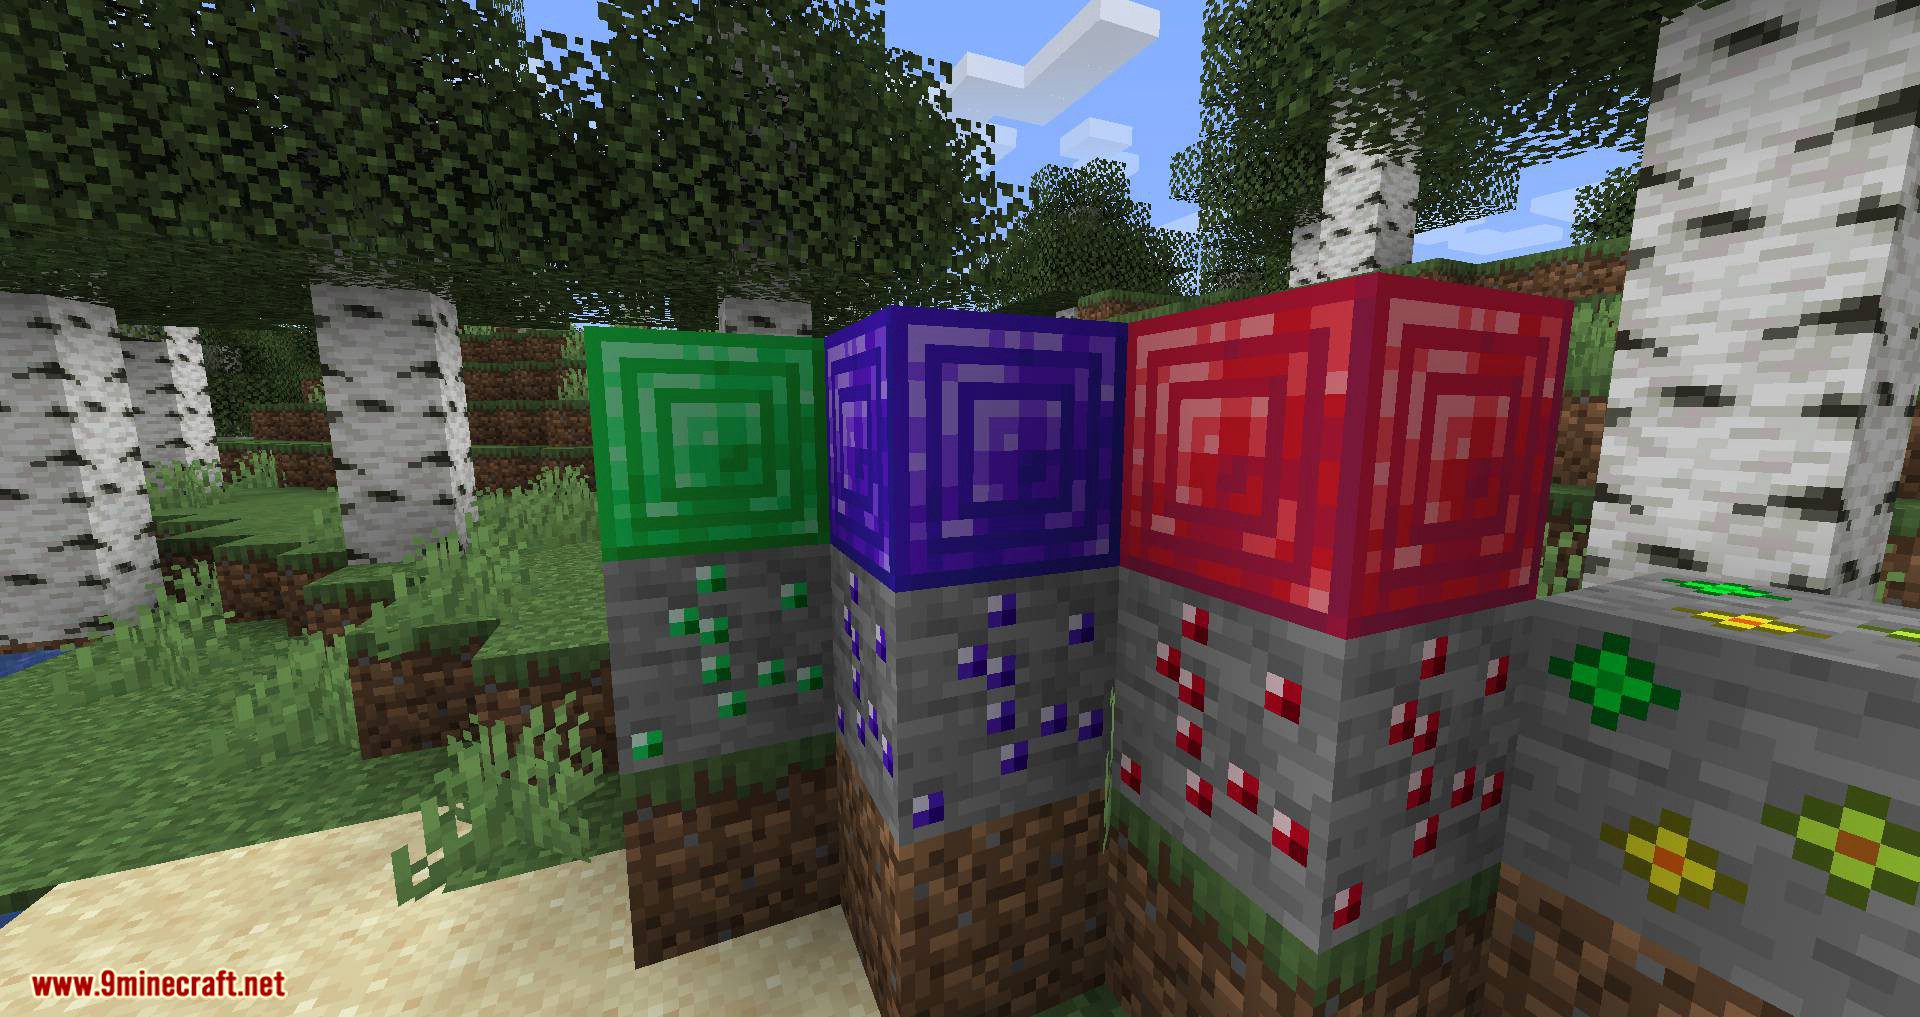 More Ores In ONE Mod (1.19.2, 1.18.2) - Ores in the Overworld, Nether, and End 7